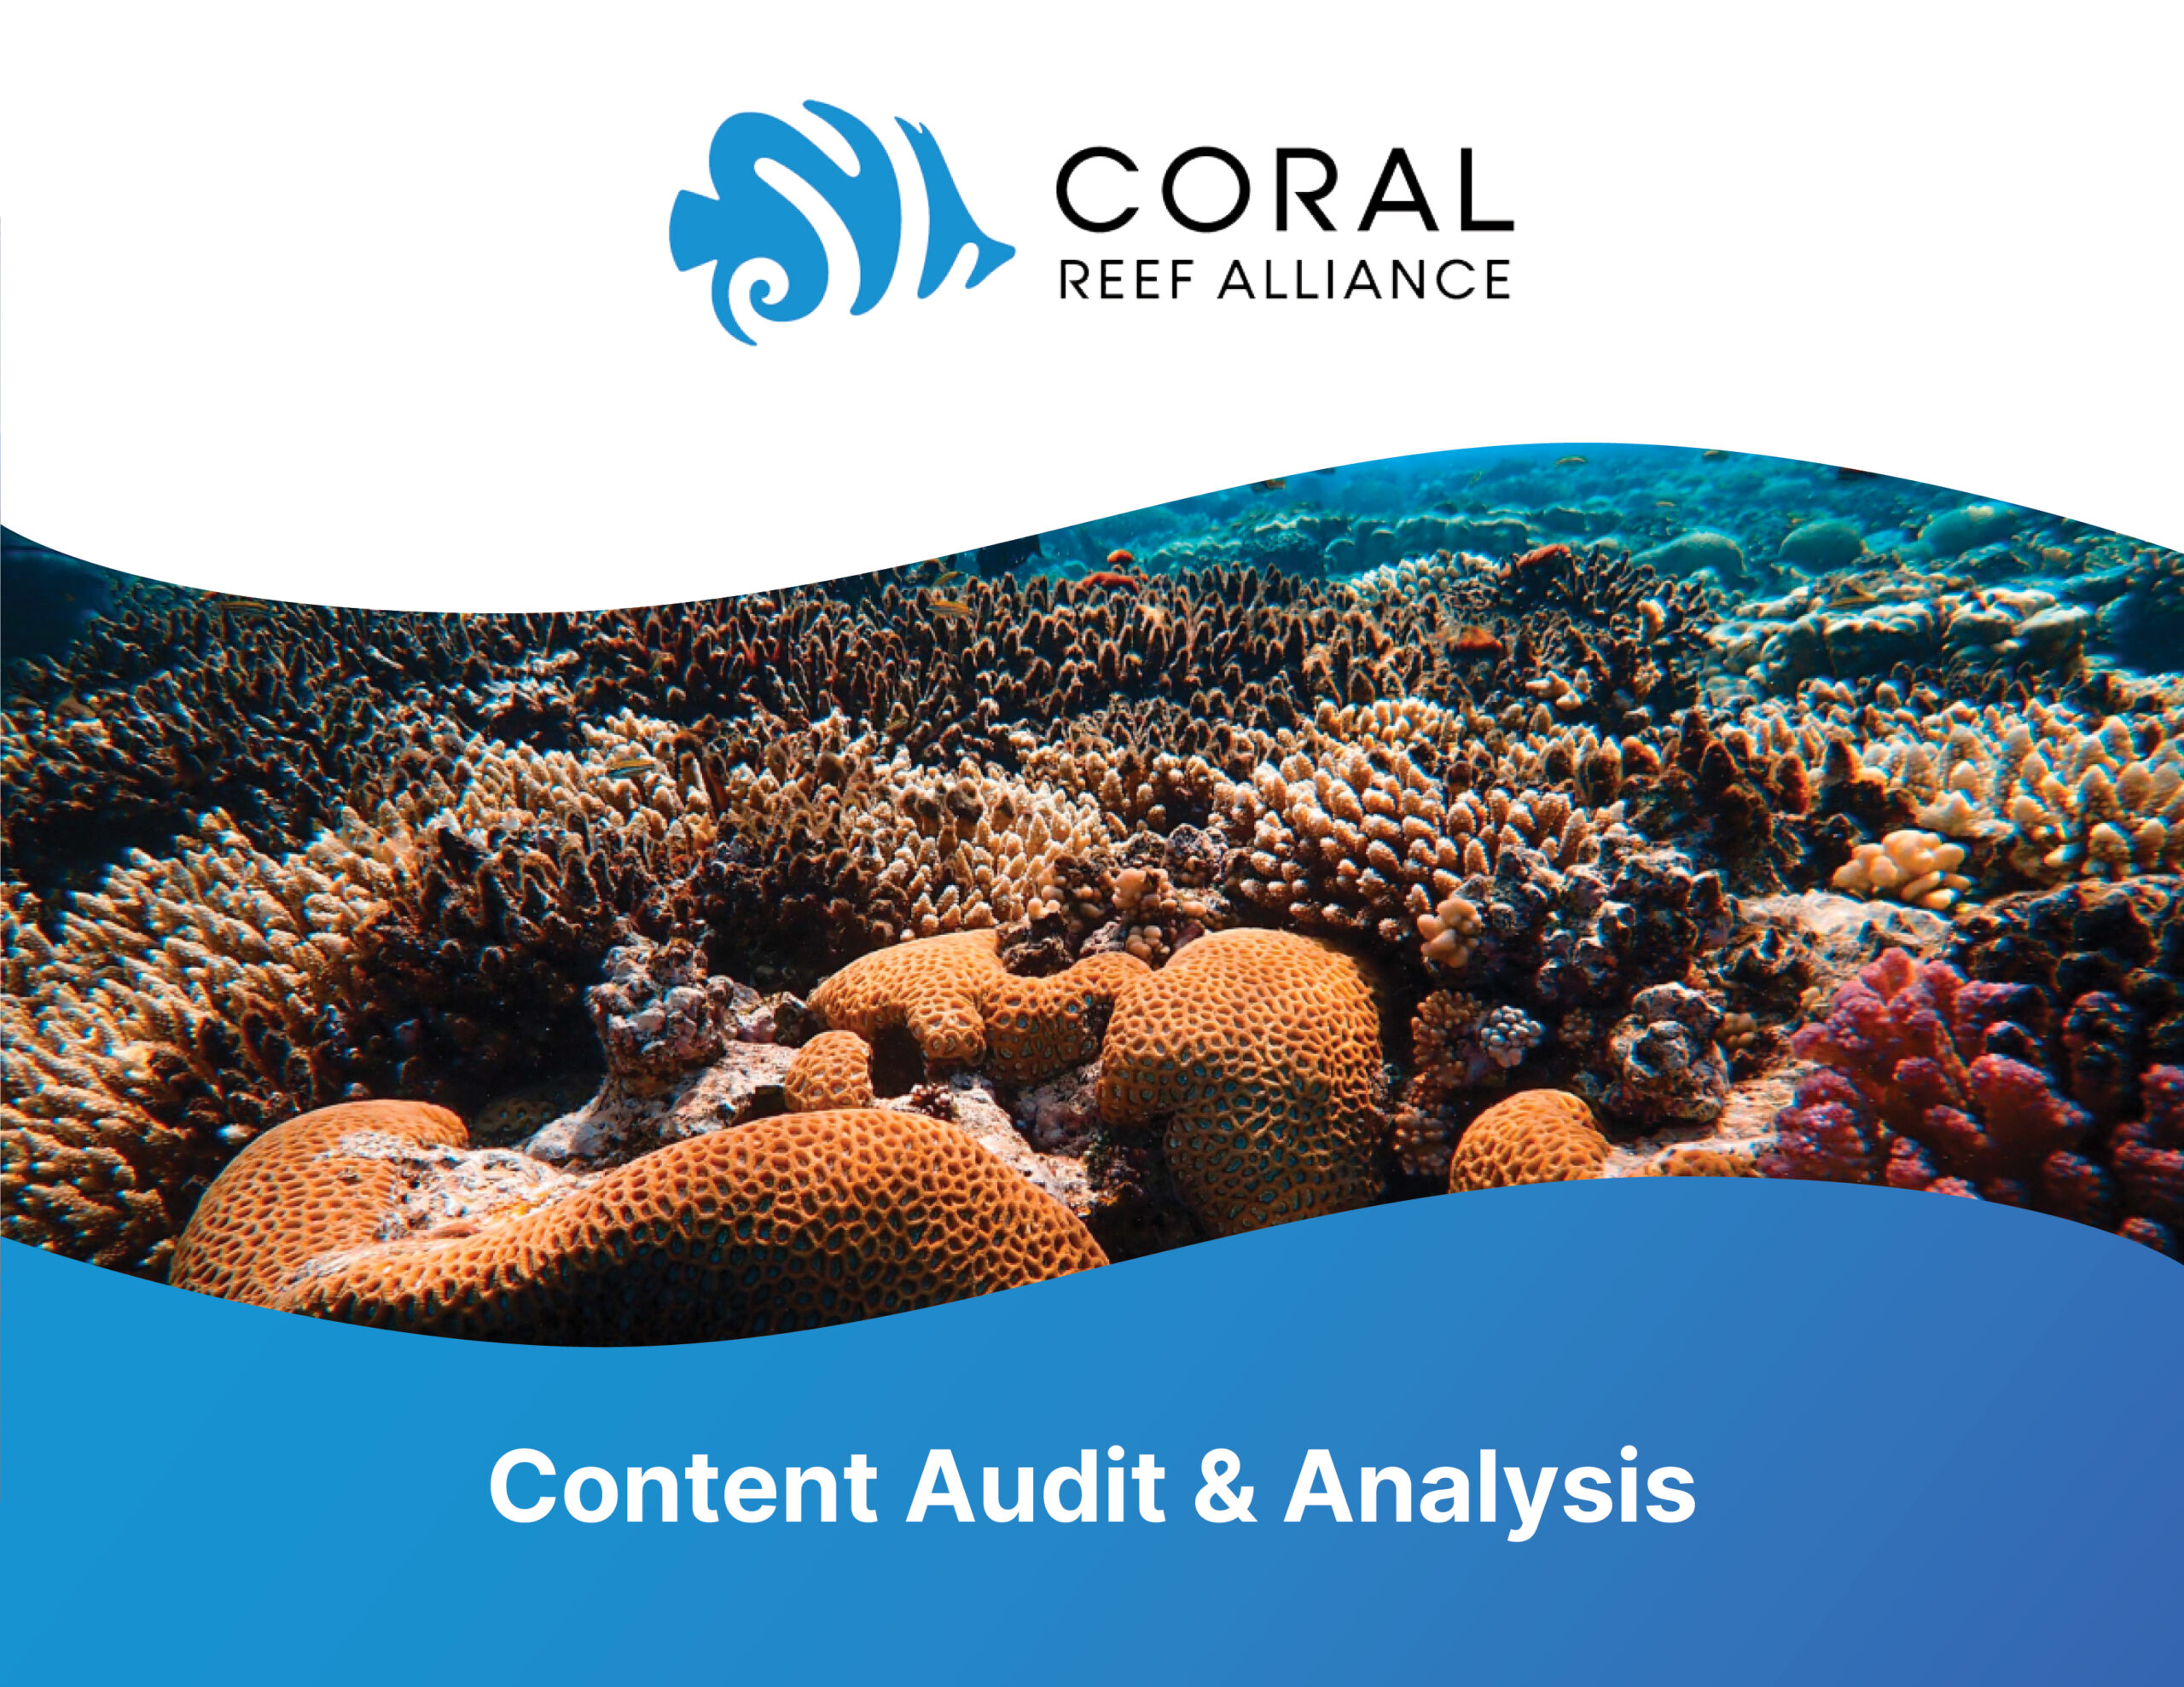 Website Content Audit & Analysis: Coral Reefs